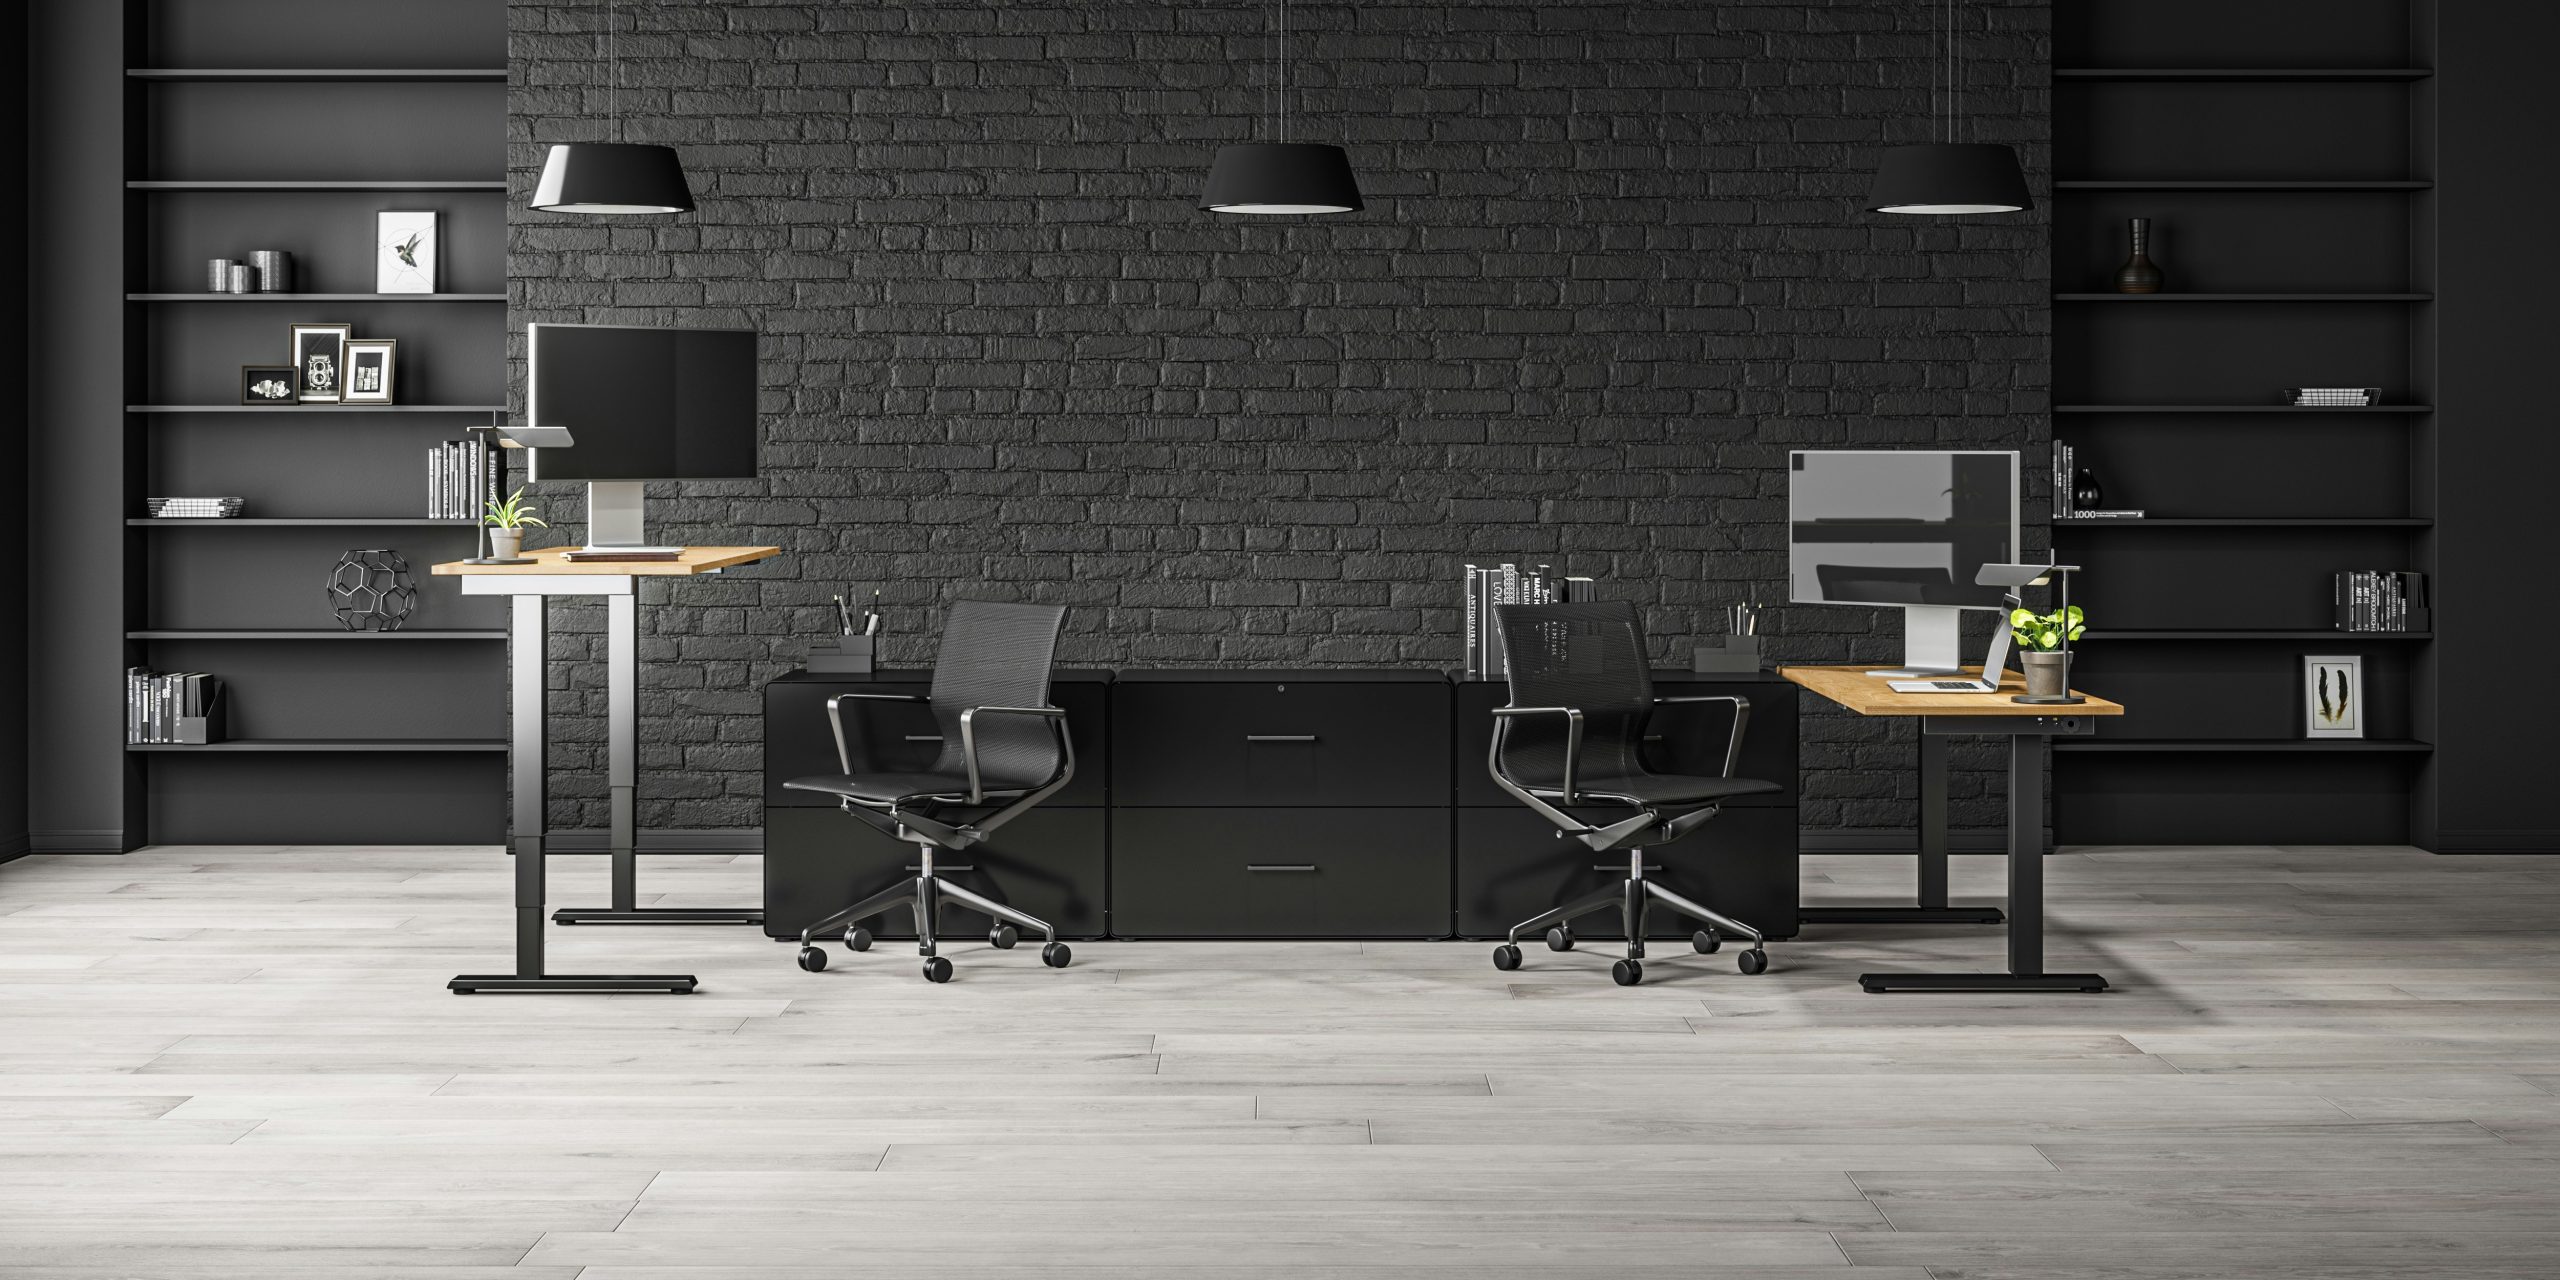 find the perfect office chair for your workspace. browse a wide selection of ergonomic, stylish, and comfortable office chairs to suit your needs.